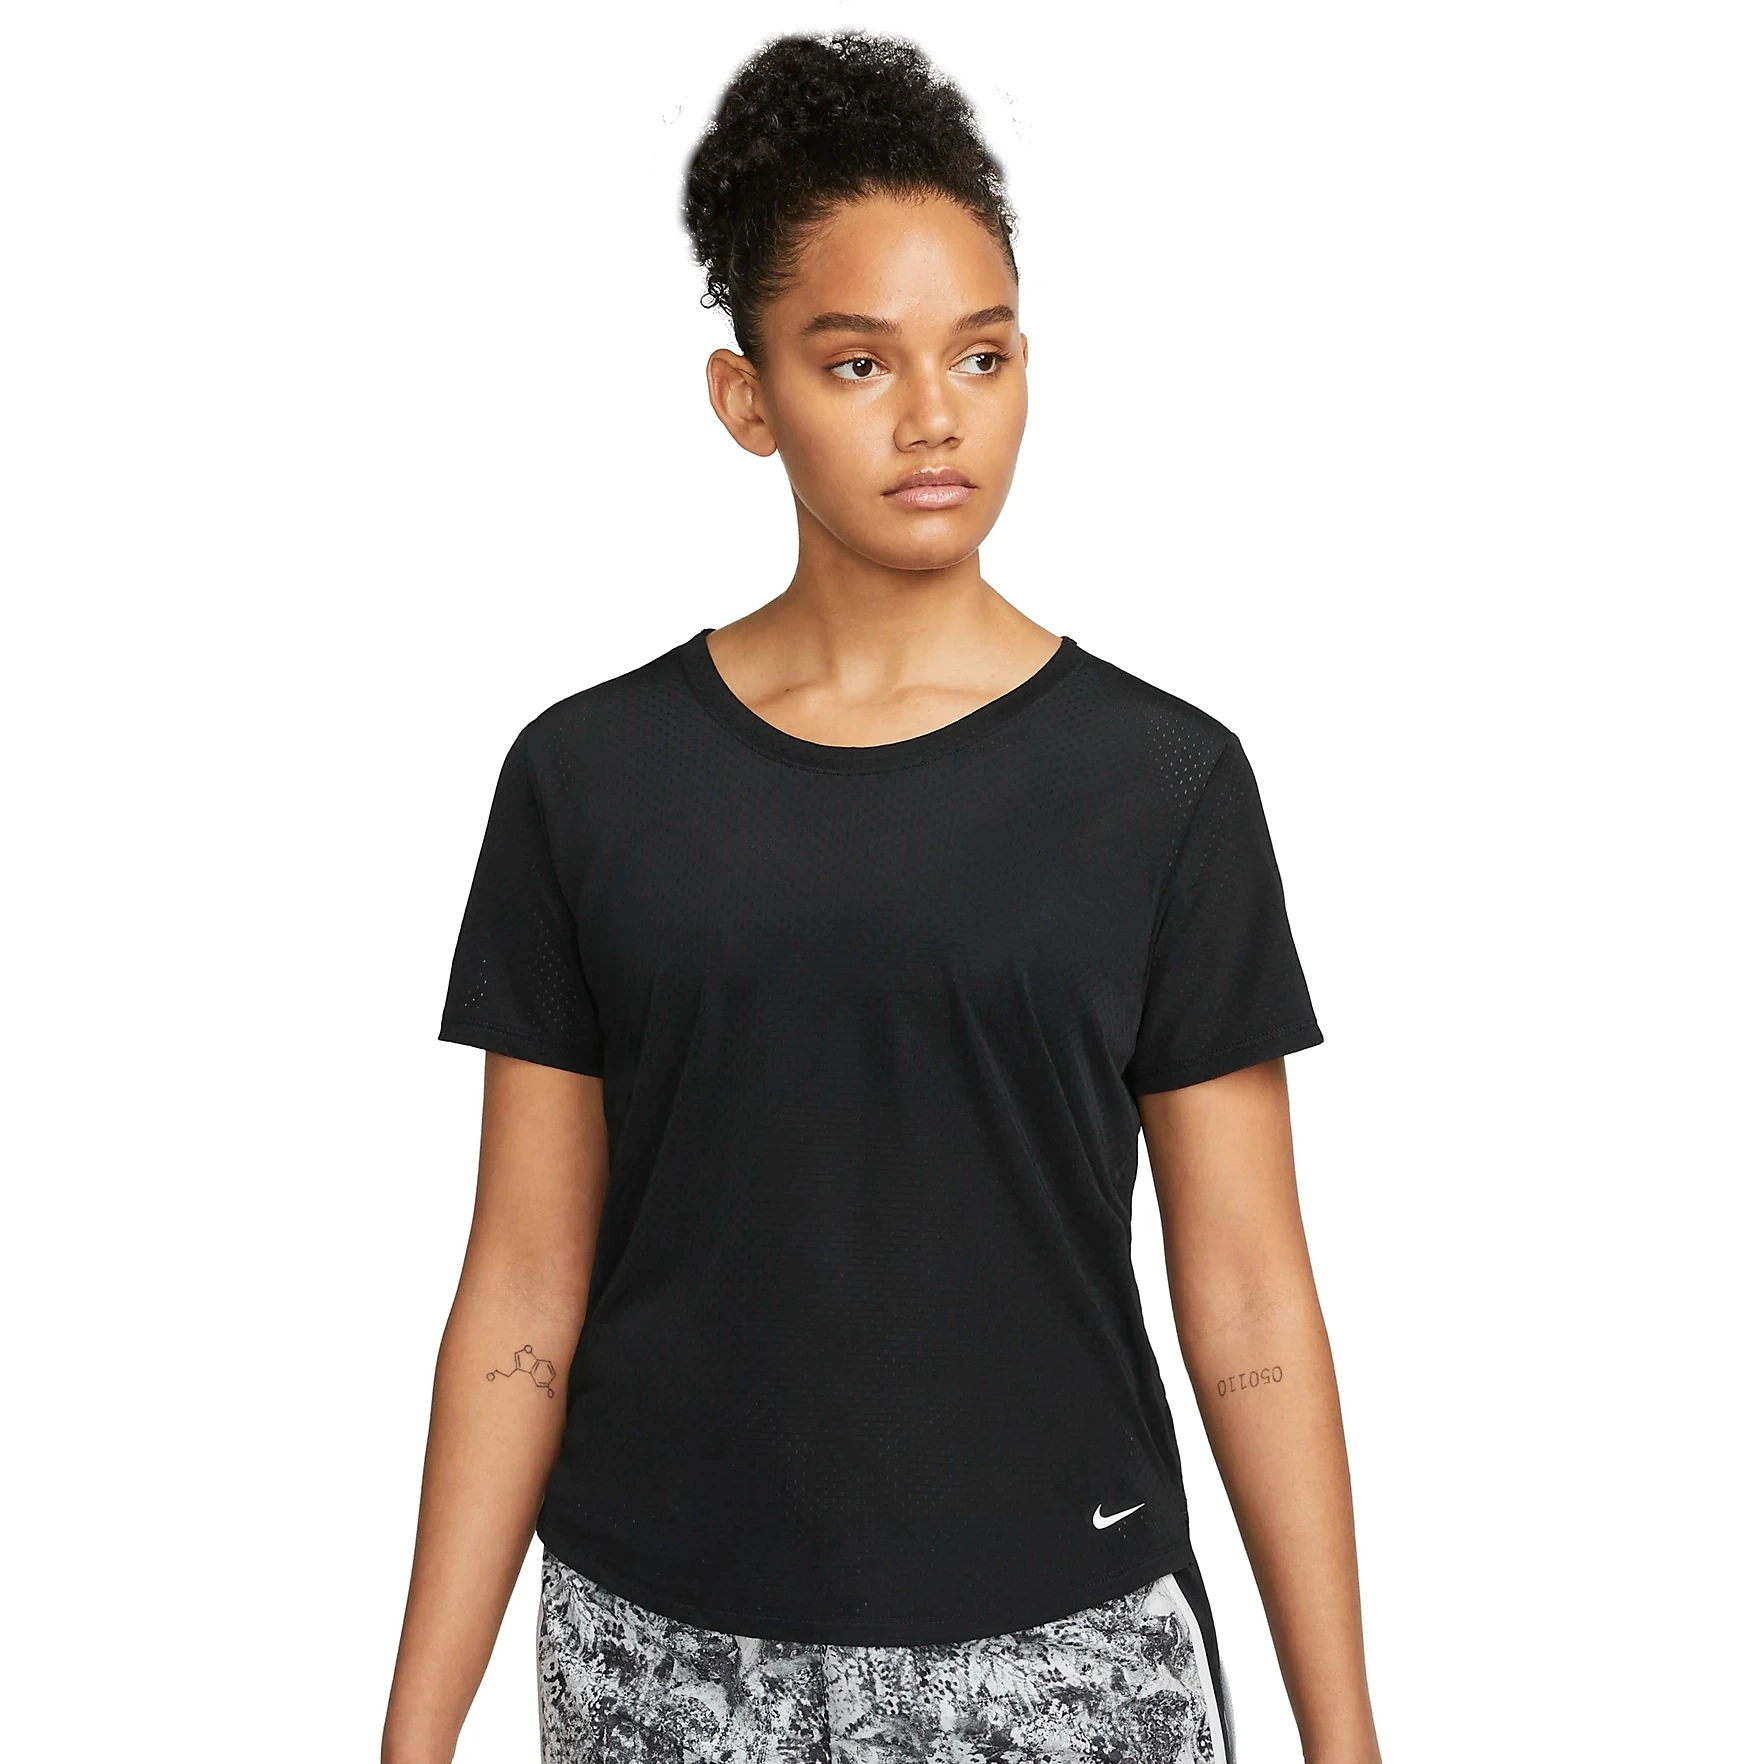 Picture of Nike Dri-FIT One Breathe Short-Sleeve Top Women - black/white DX0131-010